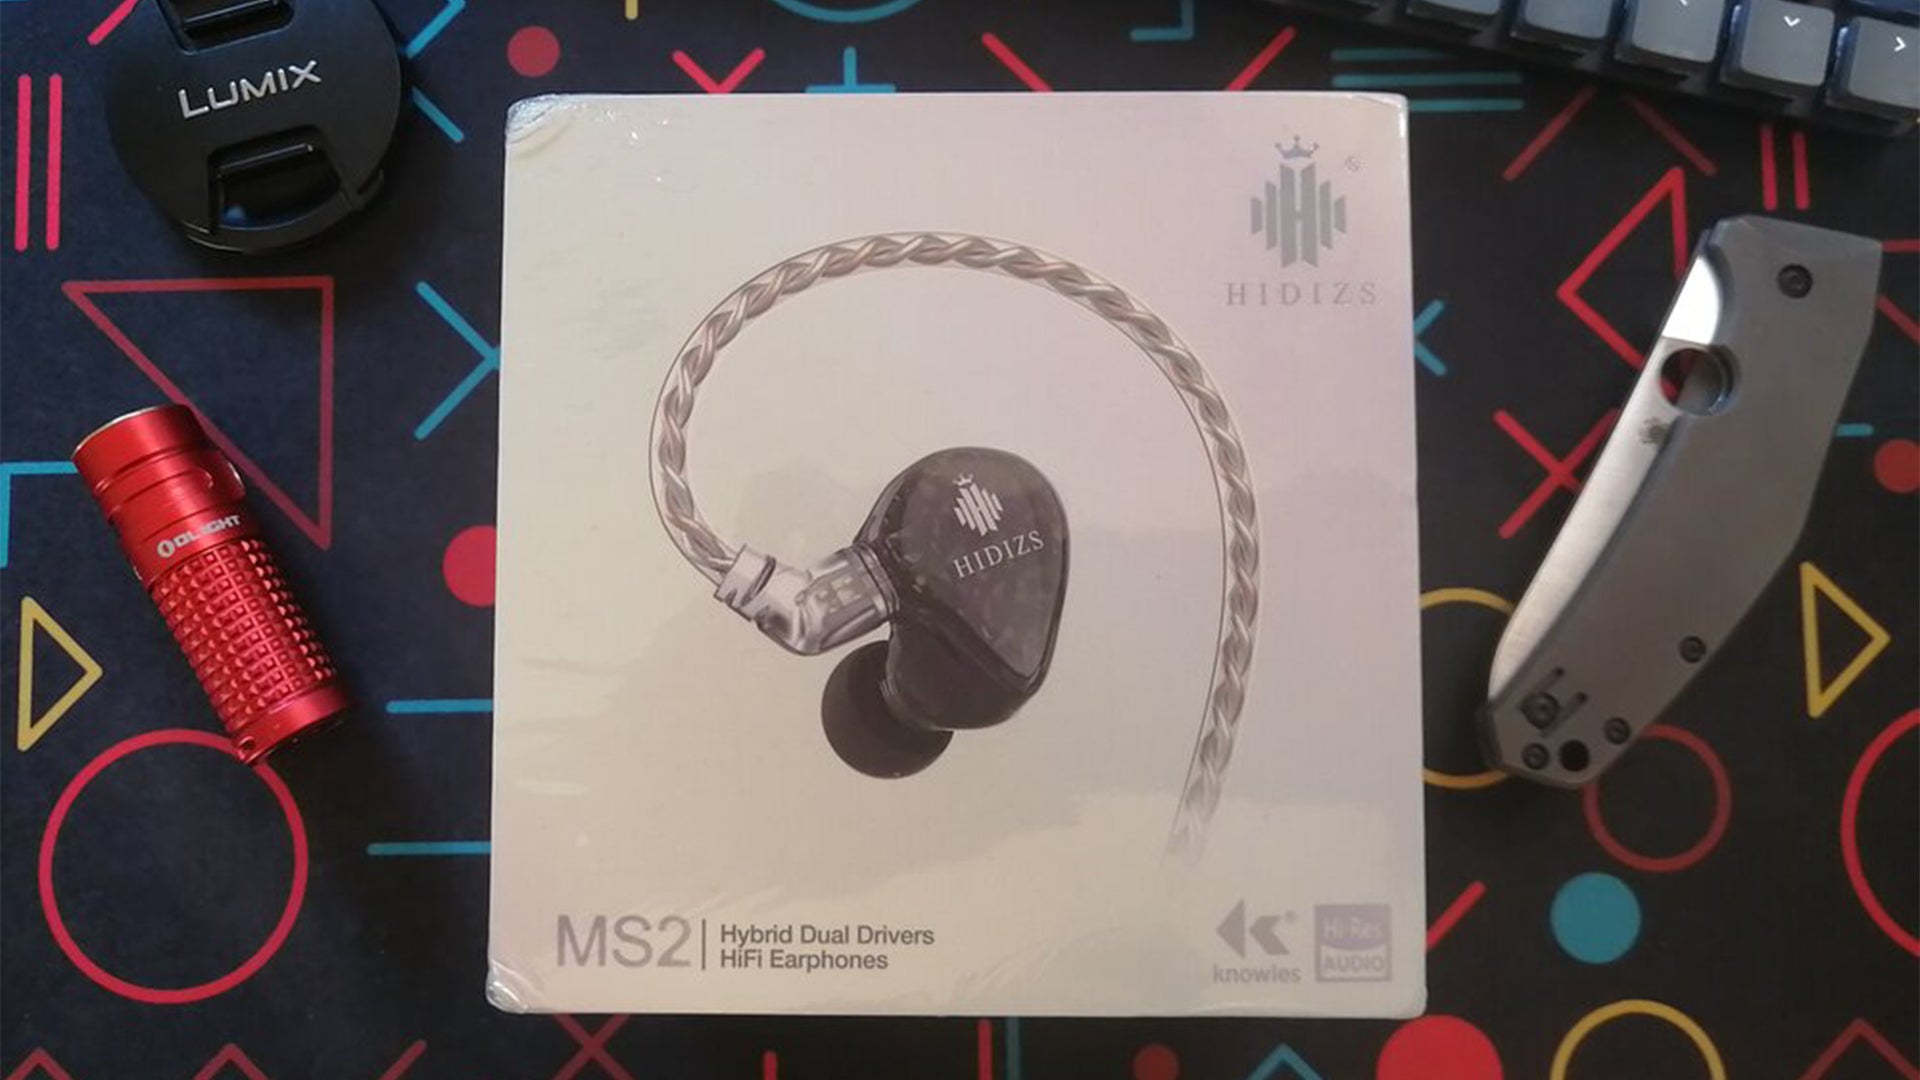 The Hidizs MS2 Mermaid: An Excellent Sub-$100 Offering in the Budget IEM Space